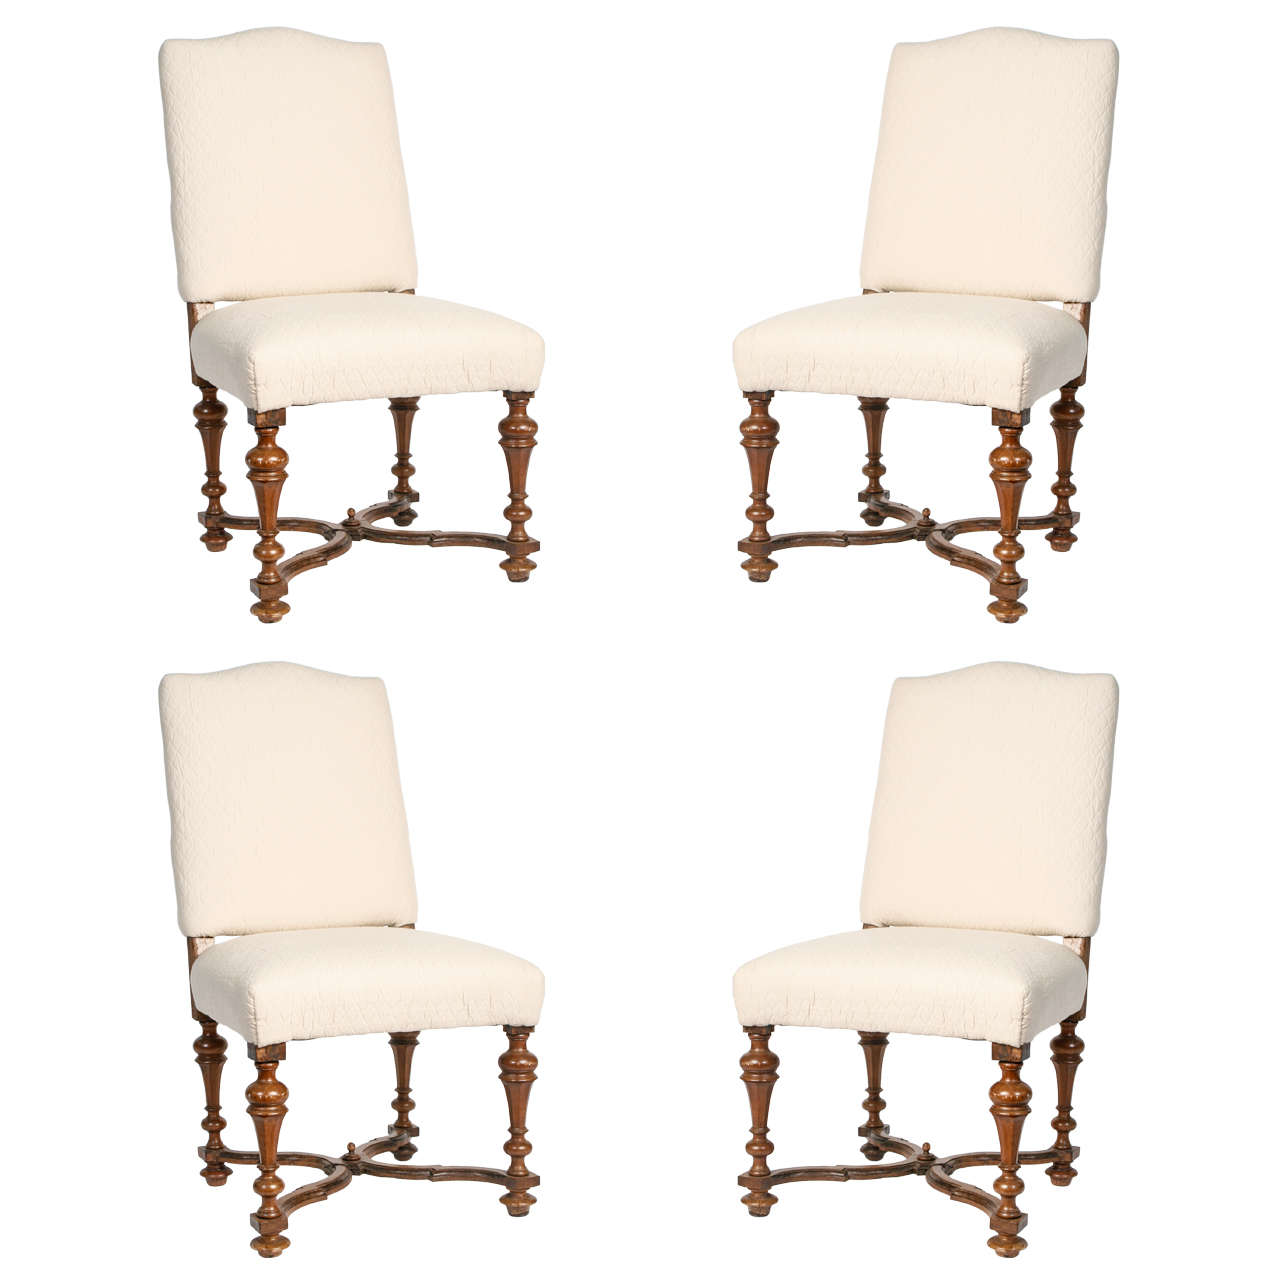 Early 19th Century Set of Four Italian Walnut Side Chairs For Sale